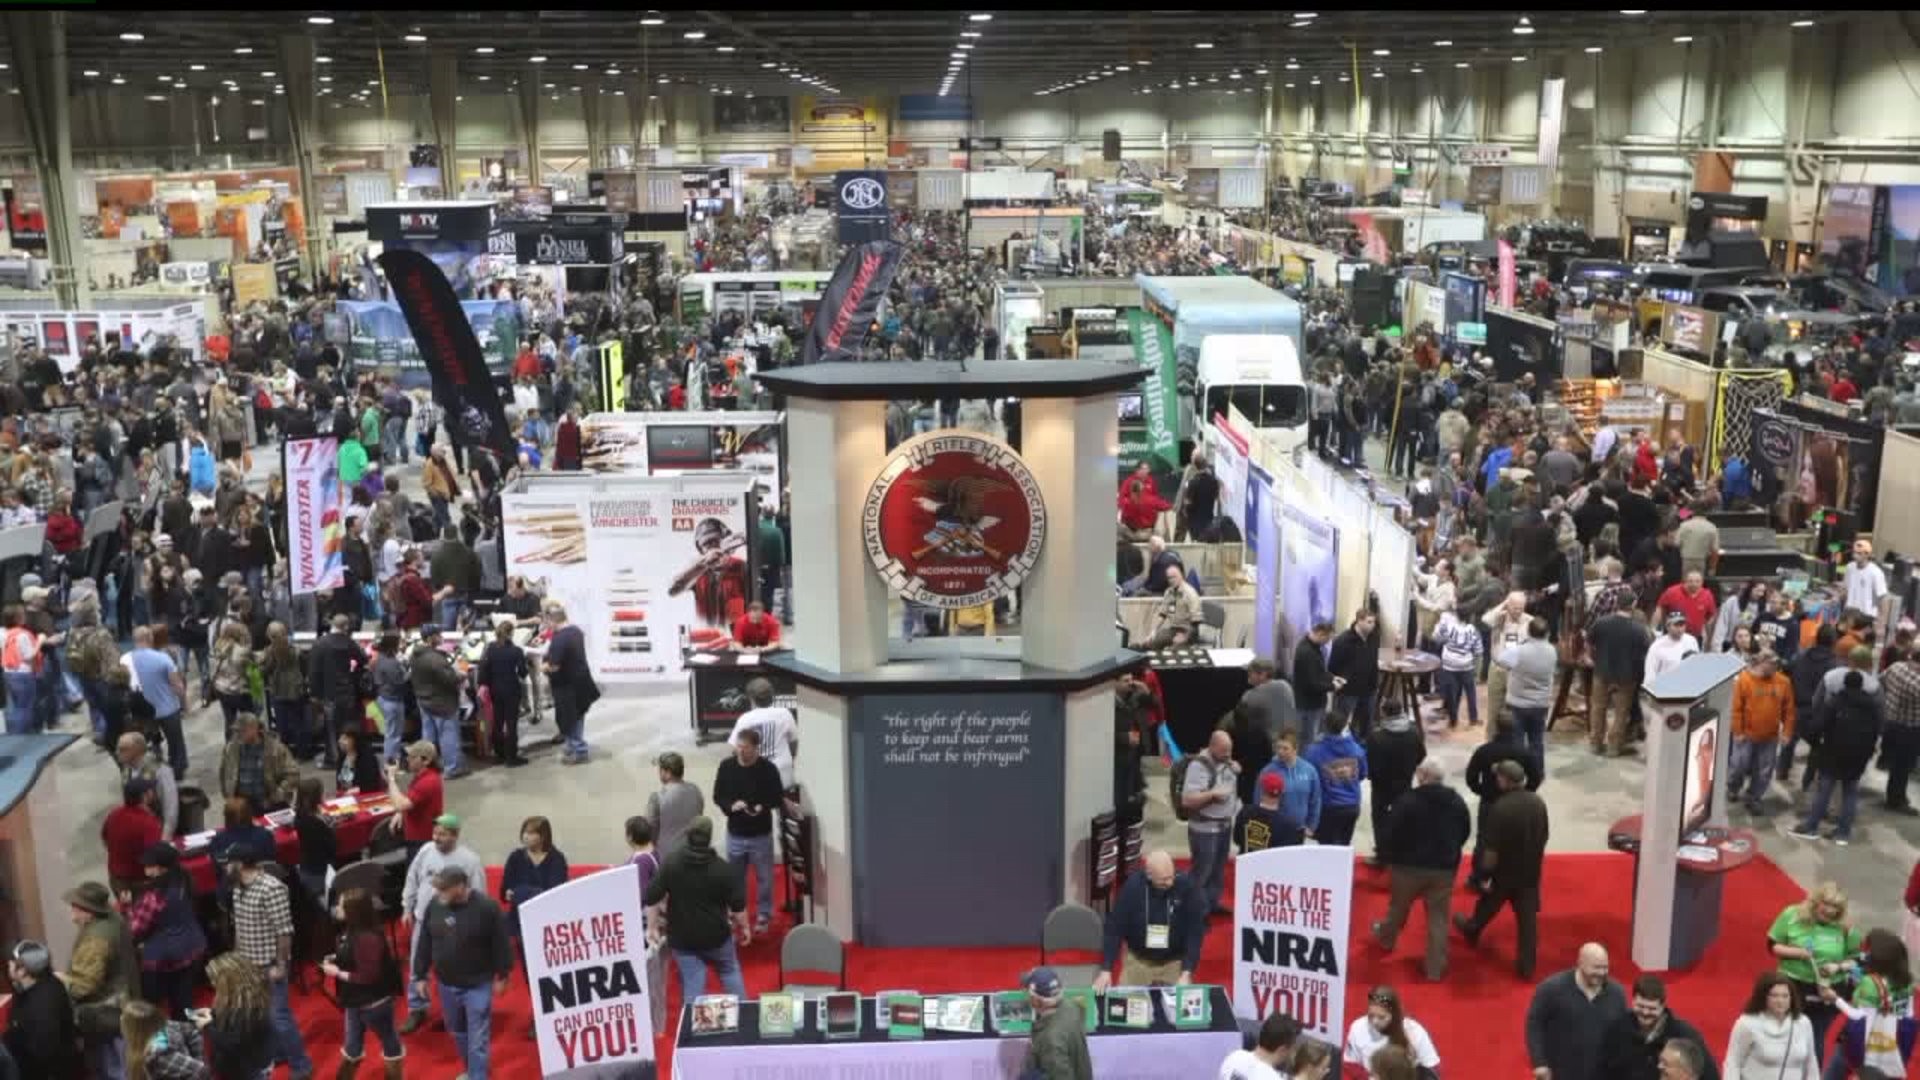 NRA Great American Outdoor Show in Harrisburg